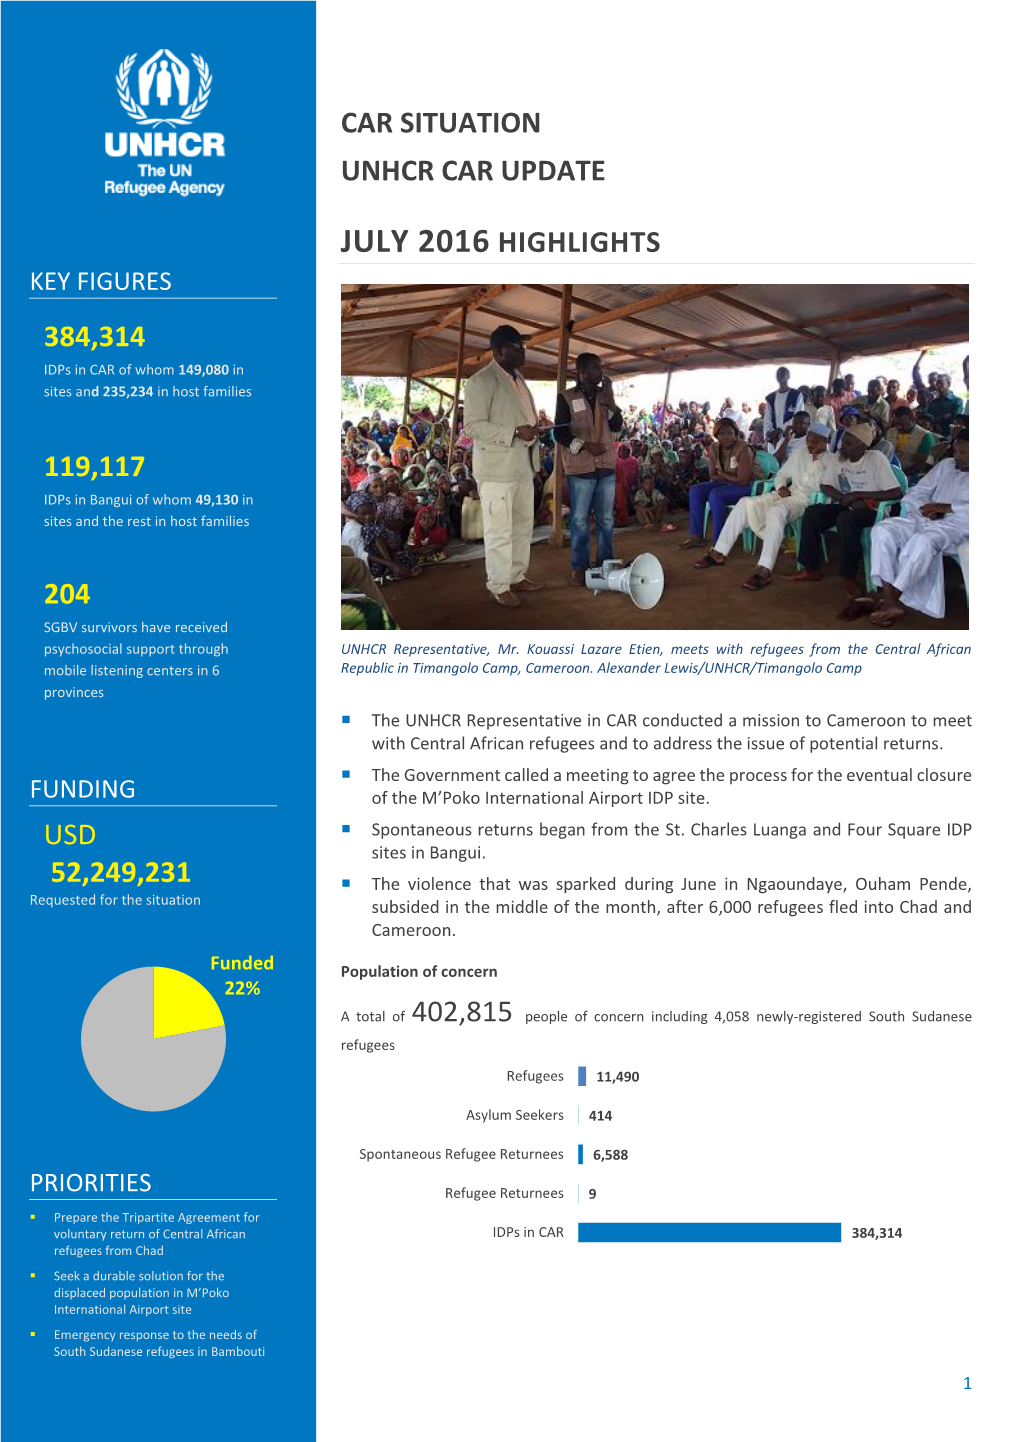 JULY 2016 HIGHLIGHTS KEY FIGURES 384,314 Idps in CAR of Whom 149,080 in Sites and 235,234 in Host Families